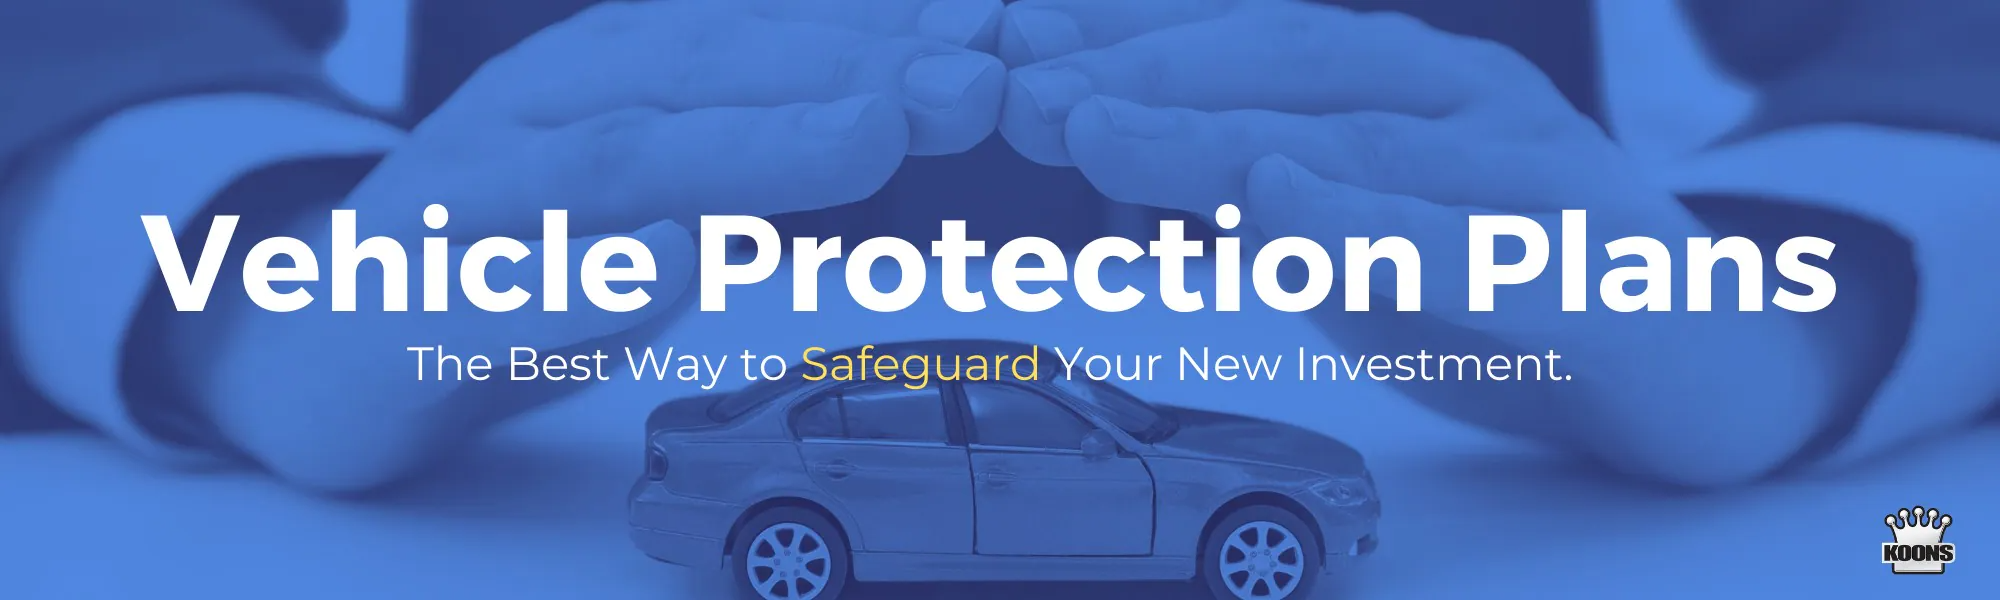 Vehicle Protection Plans